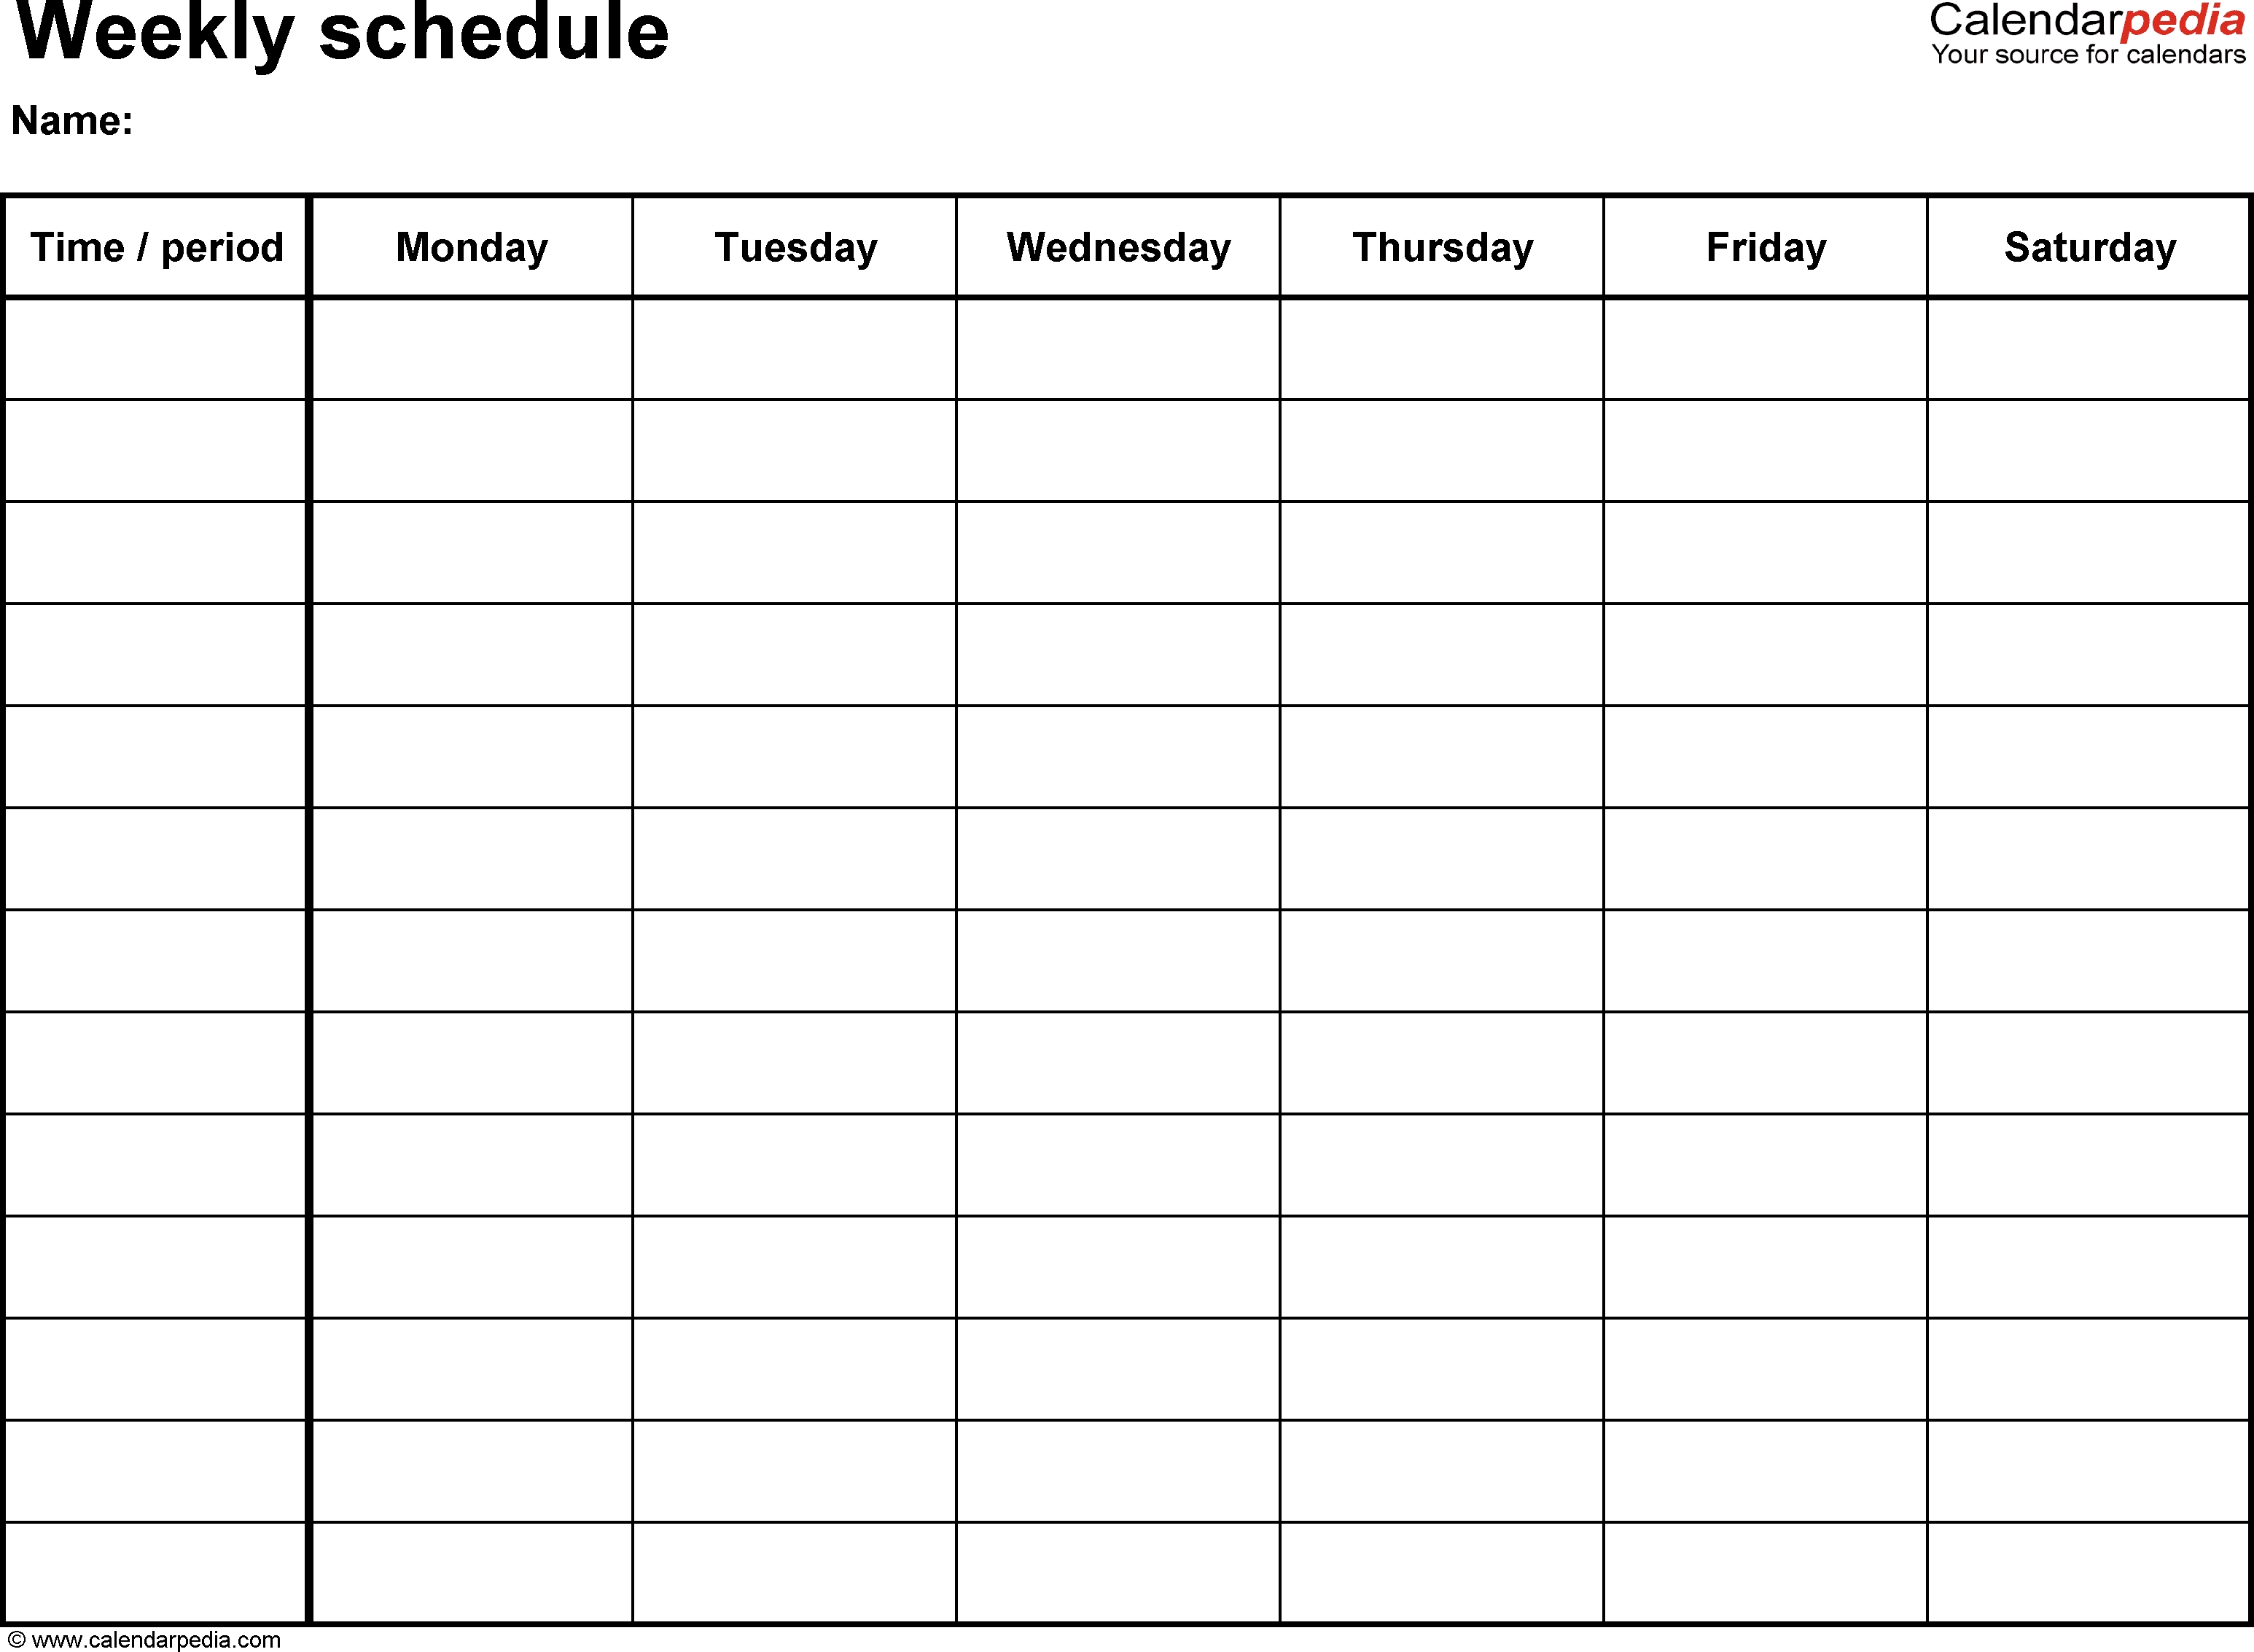 Free Weekly Schedule Templates For Excel - 18 Templates with regard to Blank 5 Day School Timetable